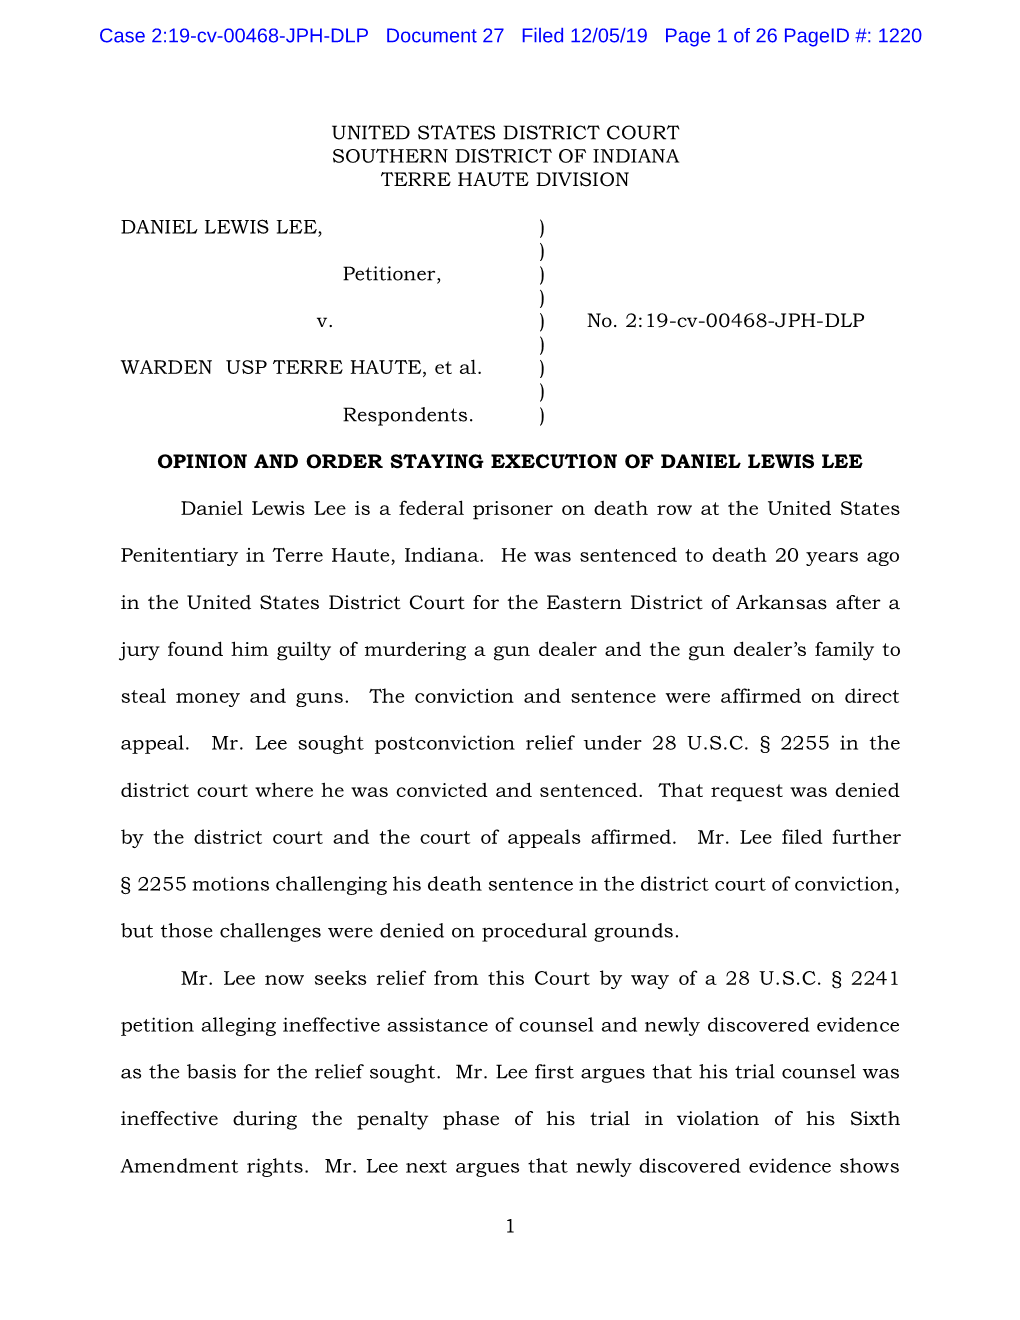 Case 2:19-Cv-00468-JPH-DLP Document 27 Filed 12/05/19 Page 1 of 26 Pageid #: 1220